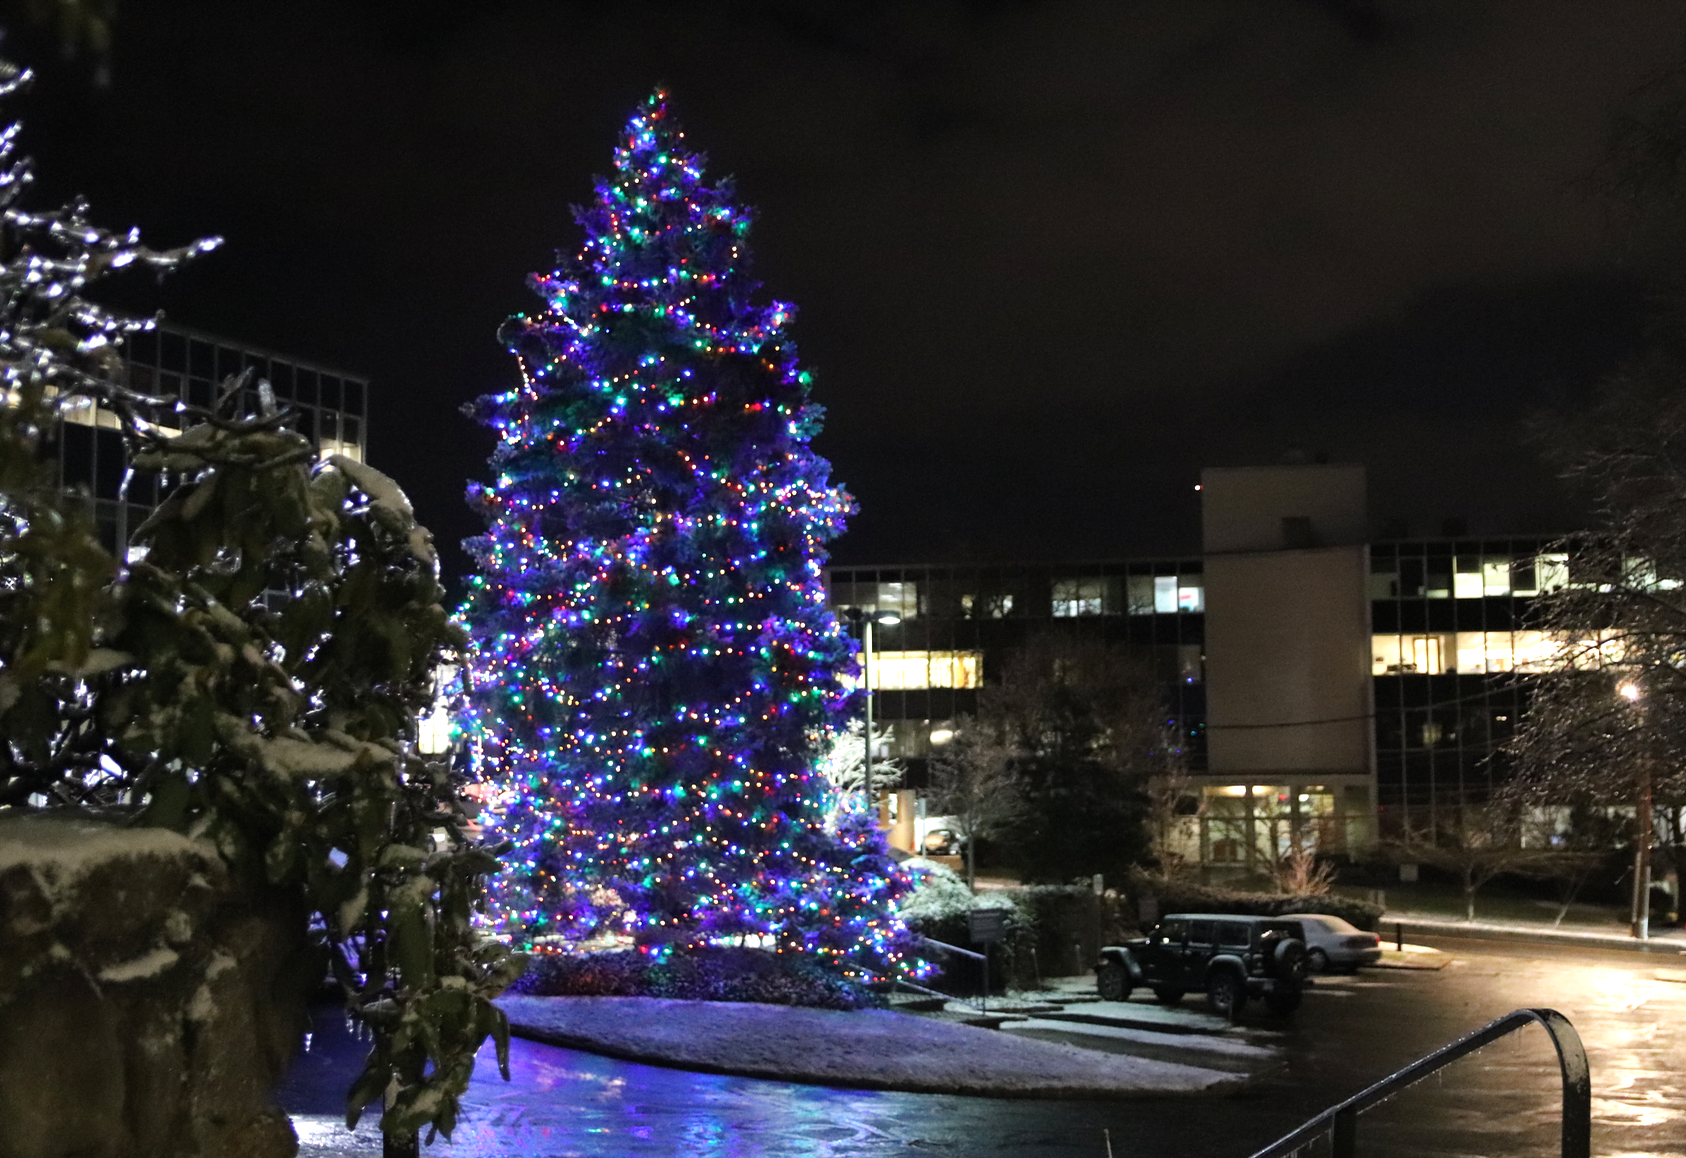 Massive tree with colorful lights at Pickwick Plaza. Photo: Leslie Yager